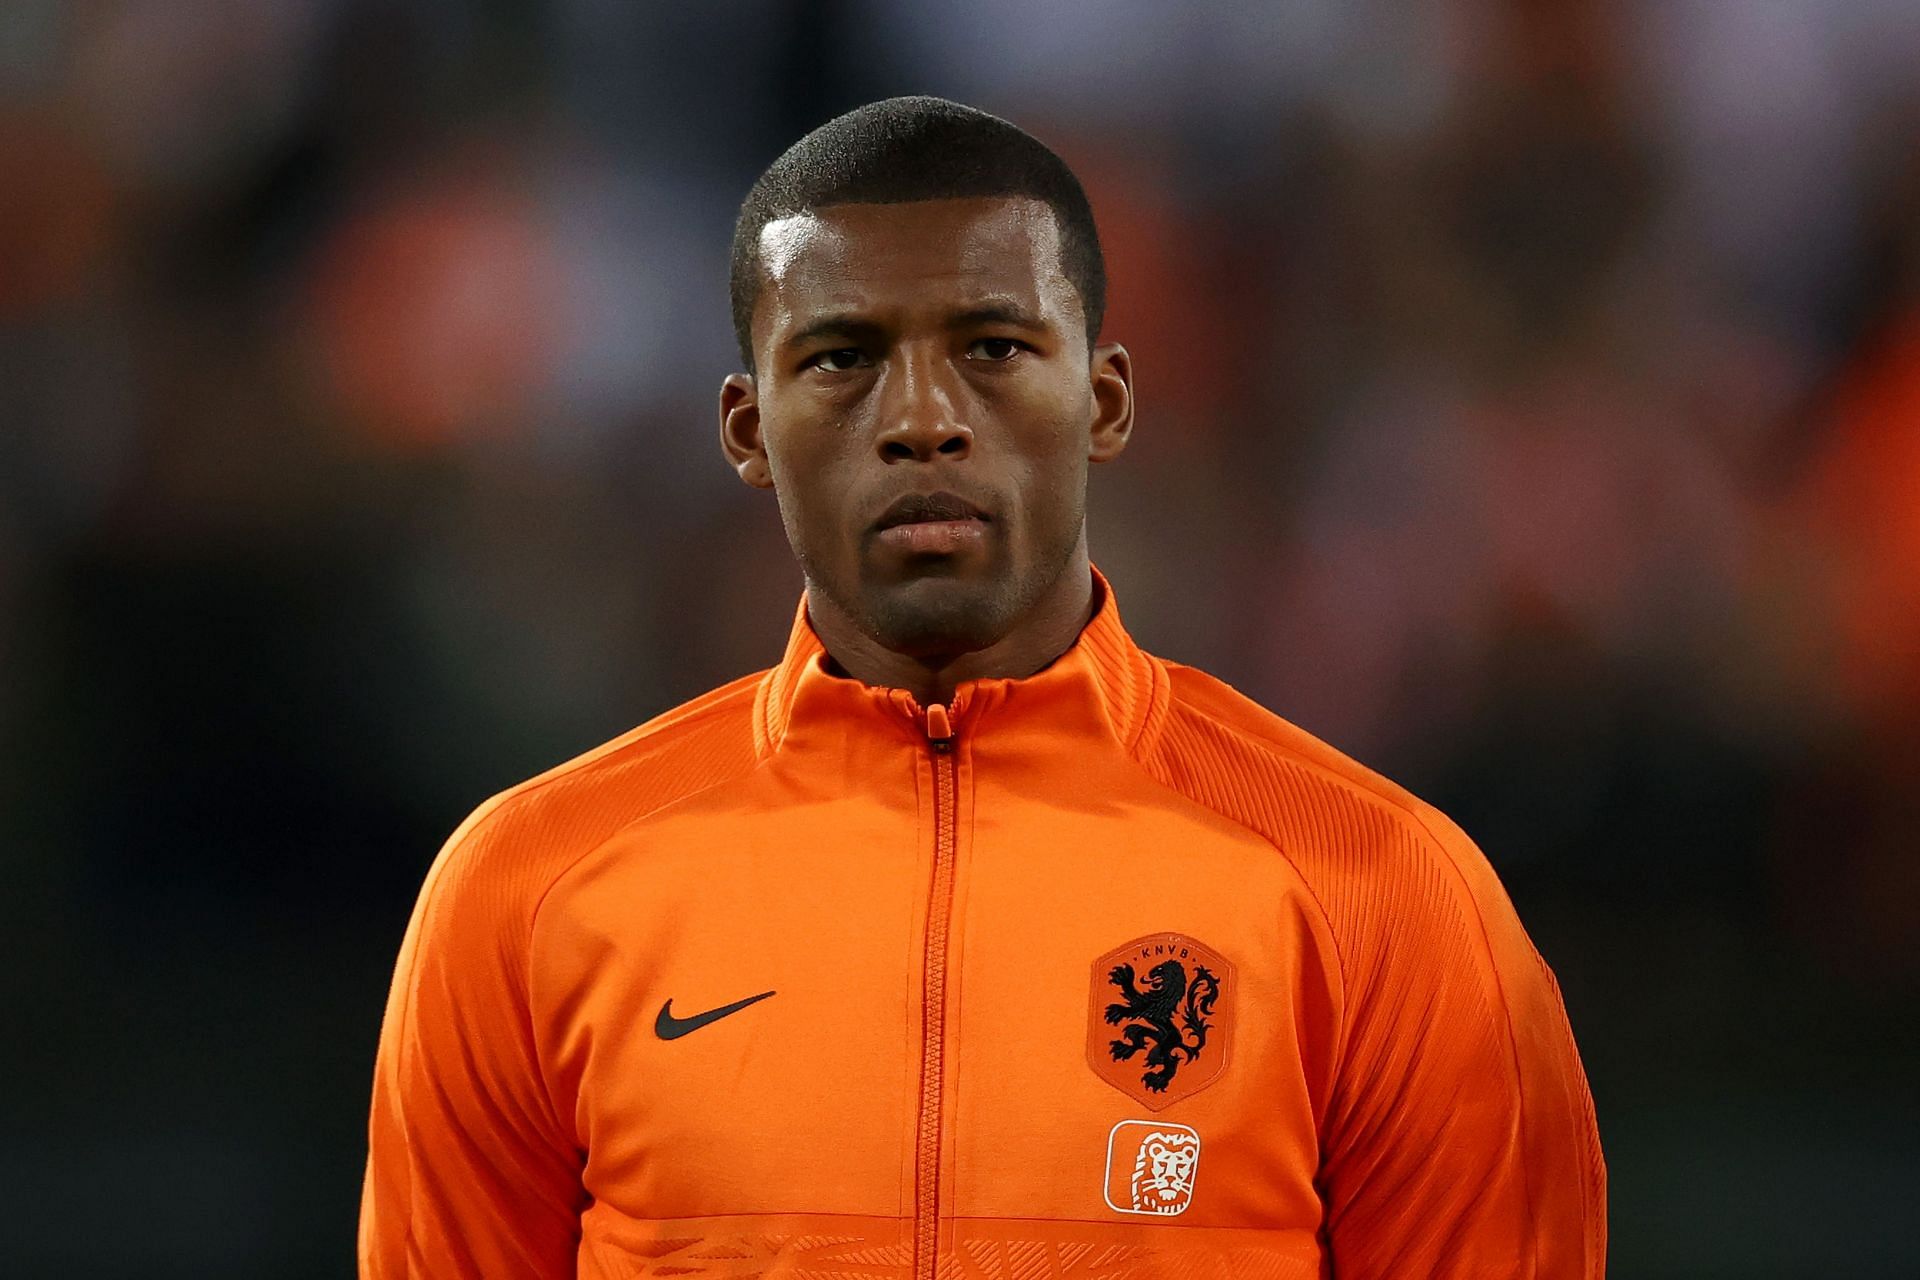 Georginio Wijnaldum is eager to move in search of regular football.